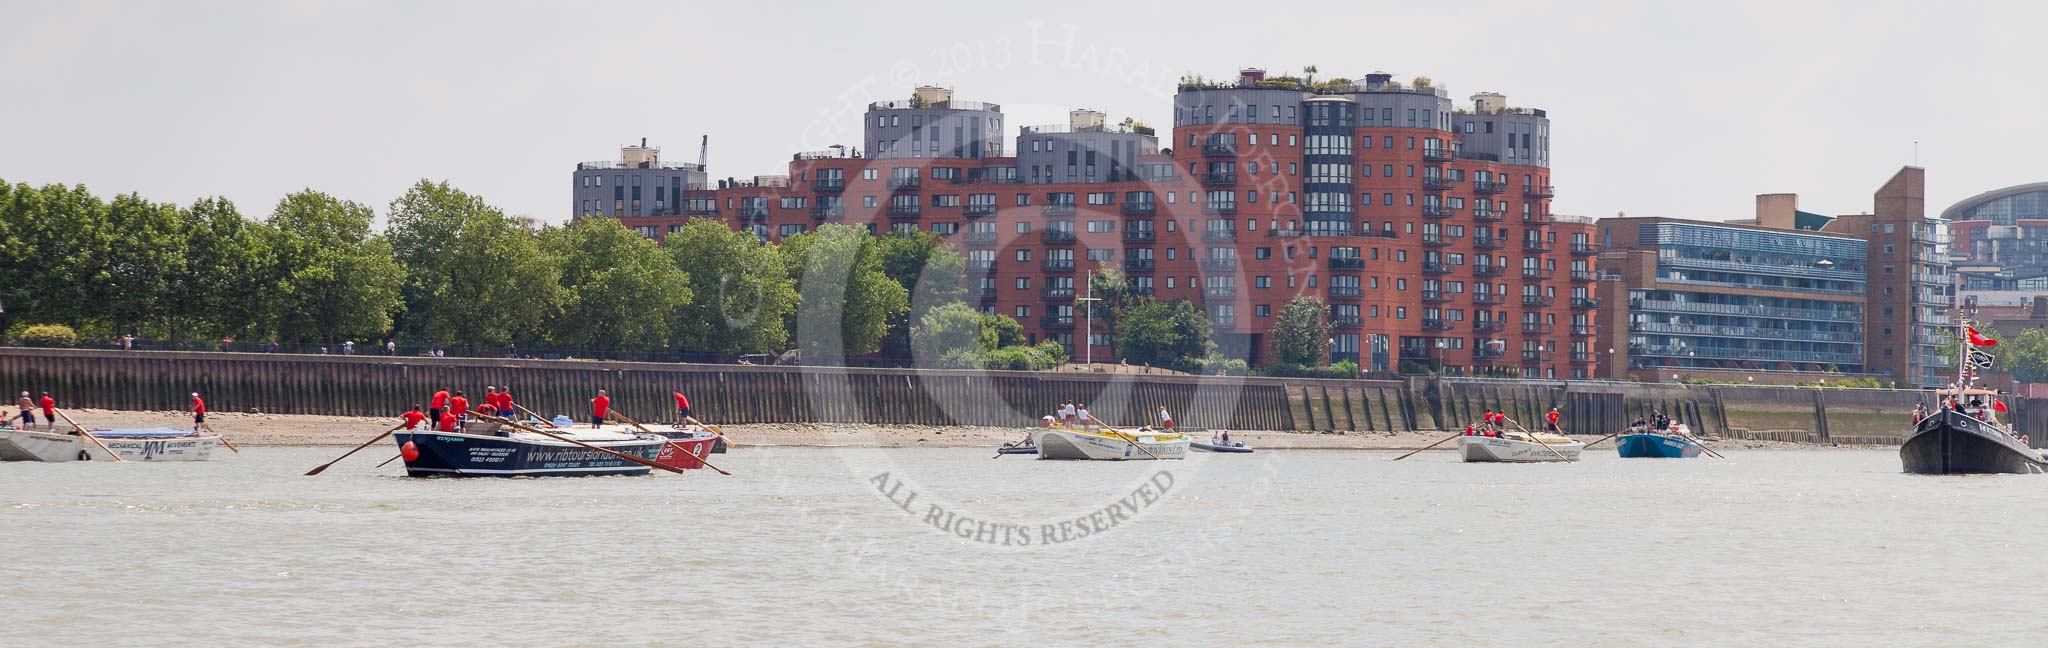 TOW River Thames Barge Driving Race 2013: Six competing barges in this image, from the left: Barge "Spirit of Mountabatten", by Mechanical Movements and Enabling Services Ltd, "Benjamin", by London Party Boats, "Jane", by the RMT Union, "Hoppy", by GPS Fabrication, "Shell Bay" by South Dock Marina, and "Darren Lacey", by Princess Pocahontas..
River Thames between Greenwich and Westminster,
London,

United Kingdom,
on 13 July 2013 at 13:06, image #273